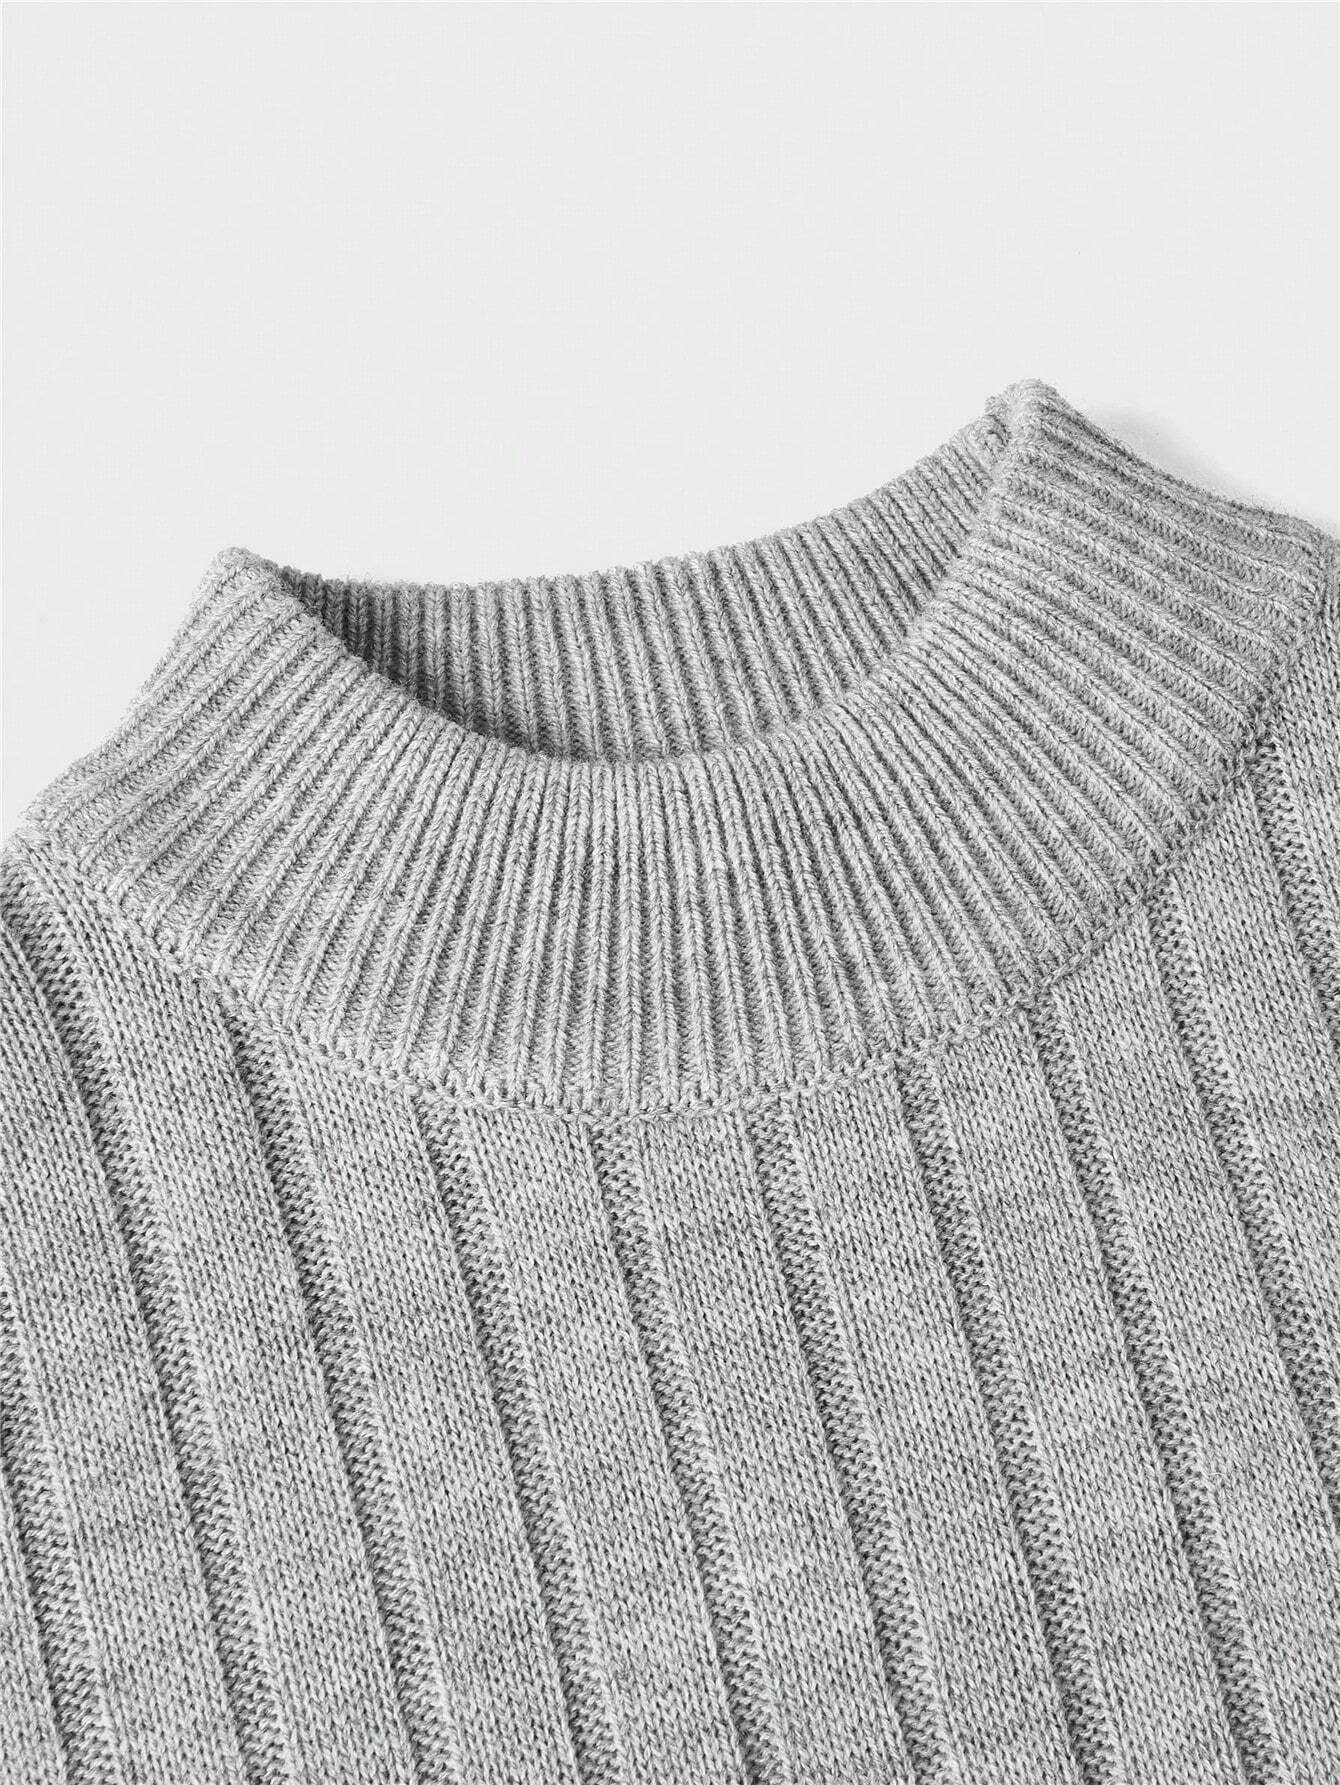 Round Collar Ribbed Knit Sweater